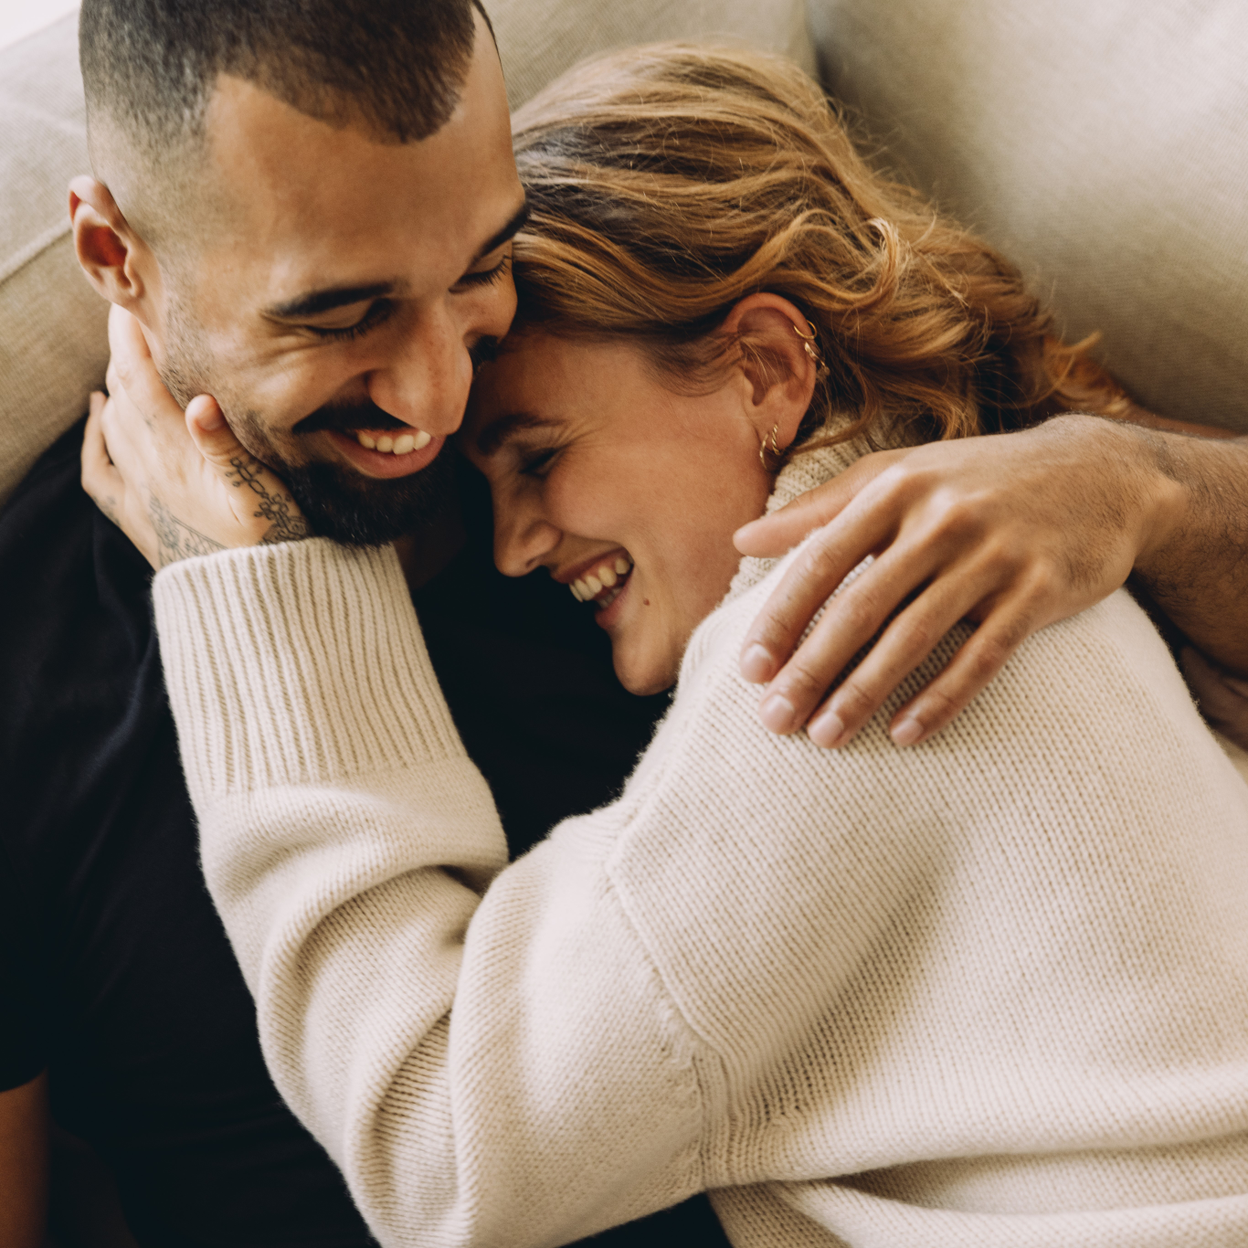 two people cuddling and smiling